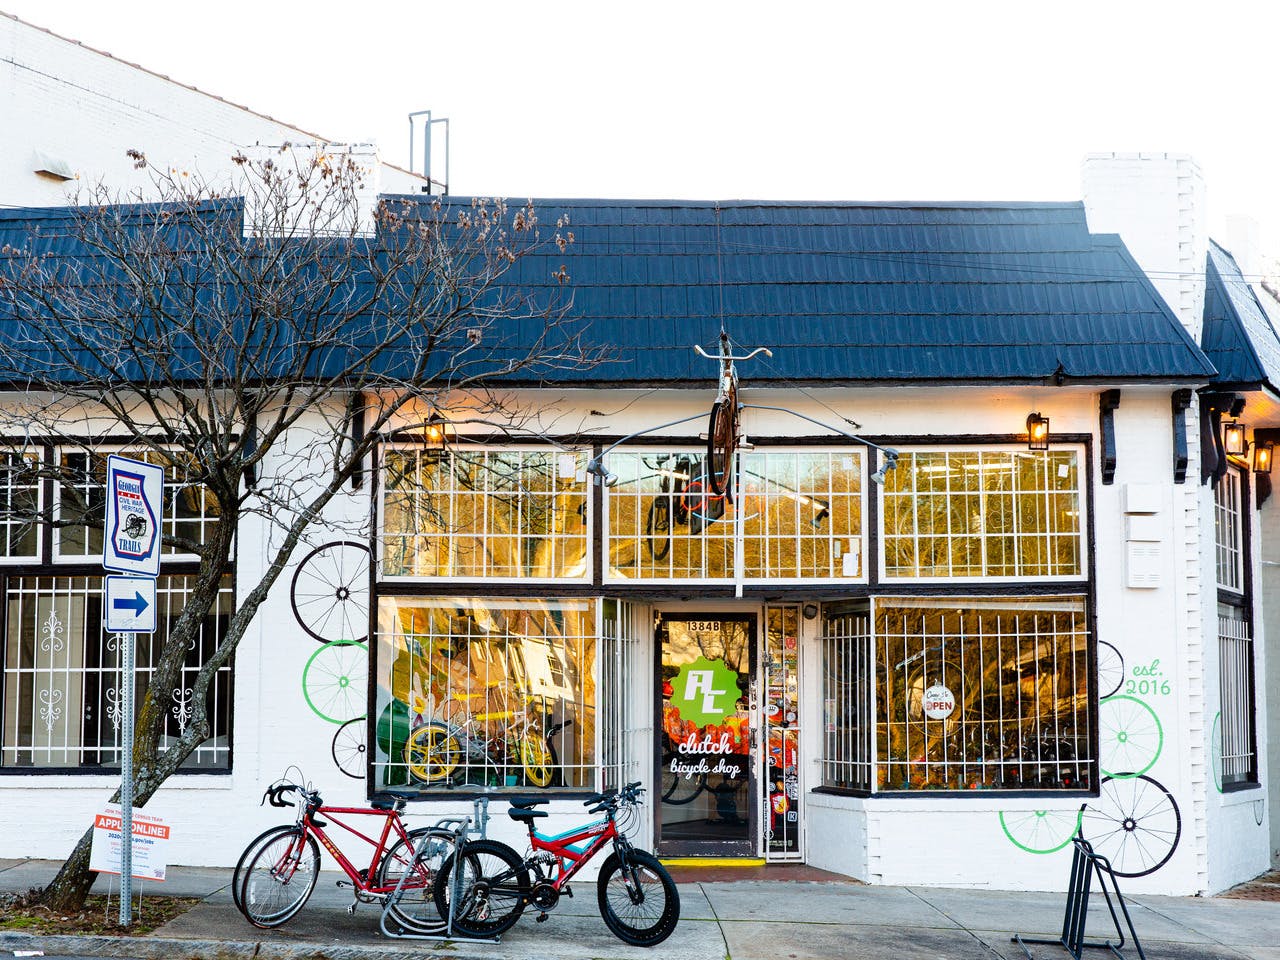 A bright white building with a lot of windows has colorful bike murals painted on the exterior and bikes lined nicely outside.